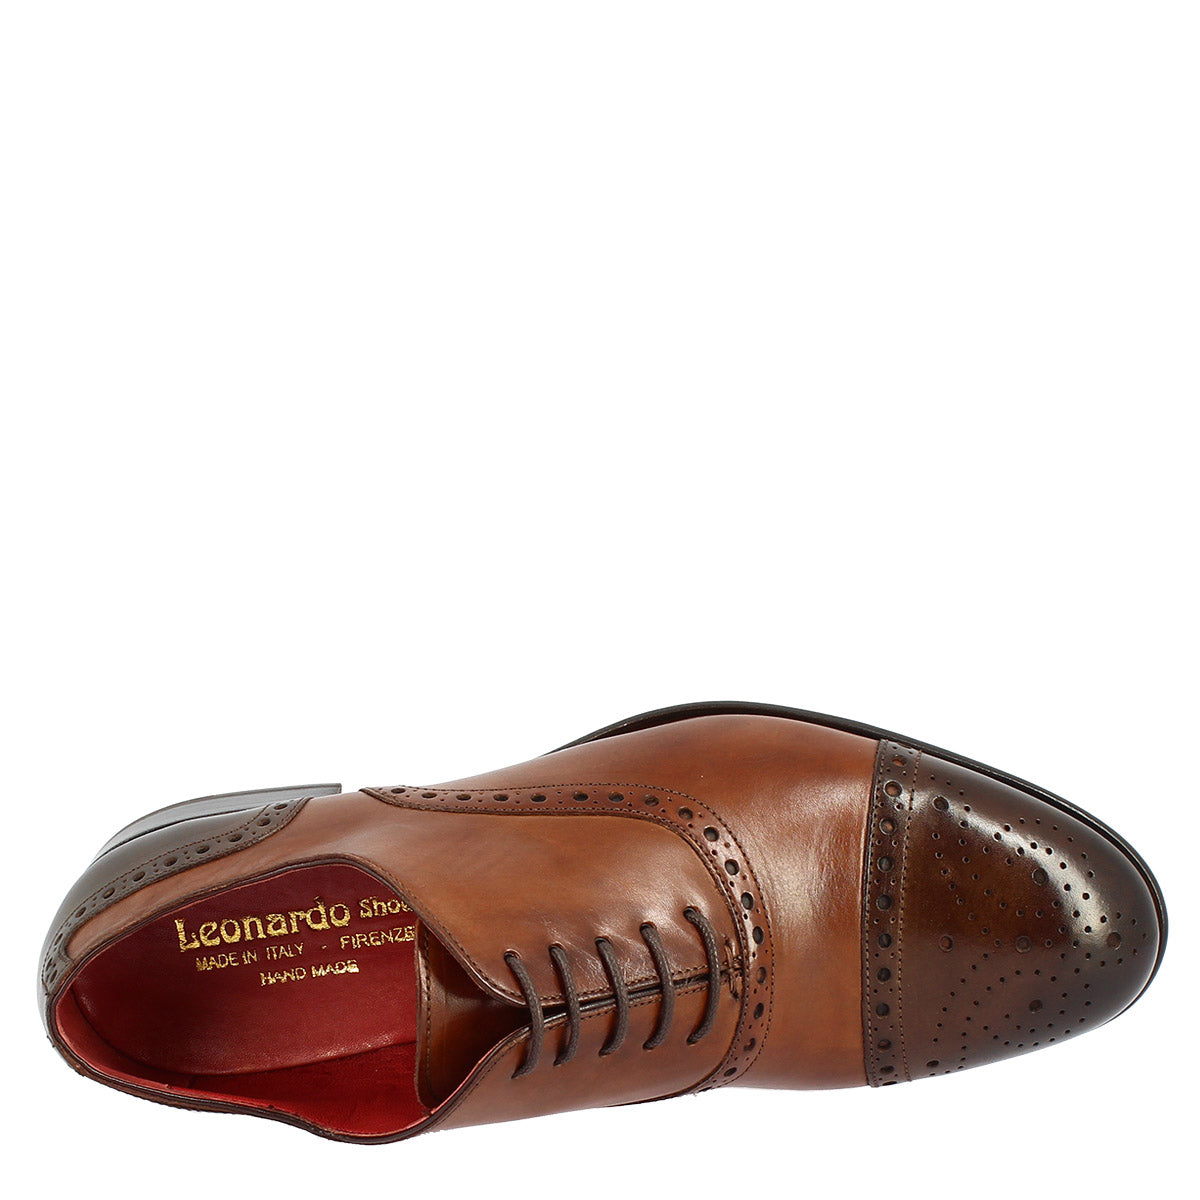 Men's lace-up brogues shoes handmade in brandy and dark brown montecarlo leather